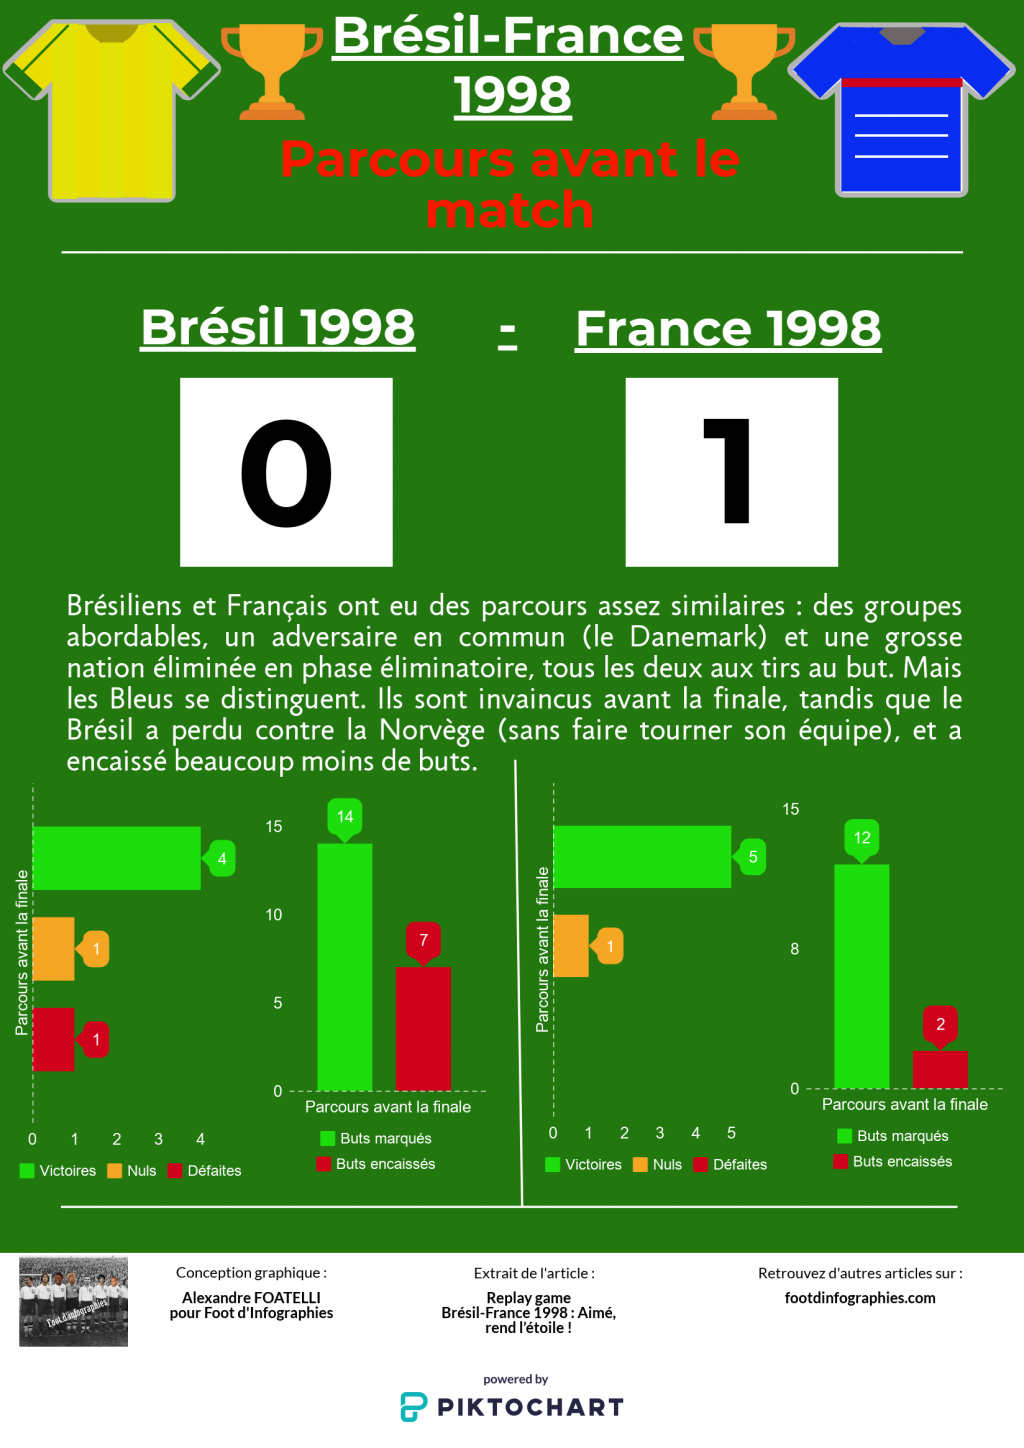 replay-game-bresil-france-1998-parcours-avant-match-foot-dinfographies